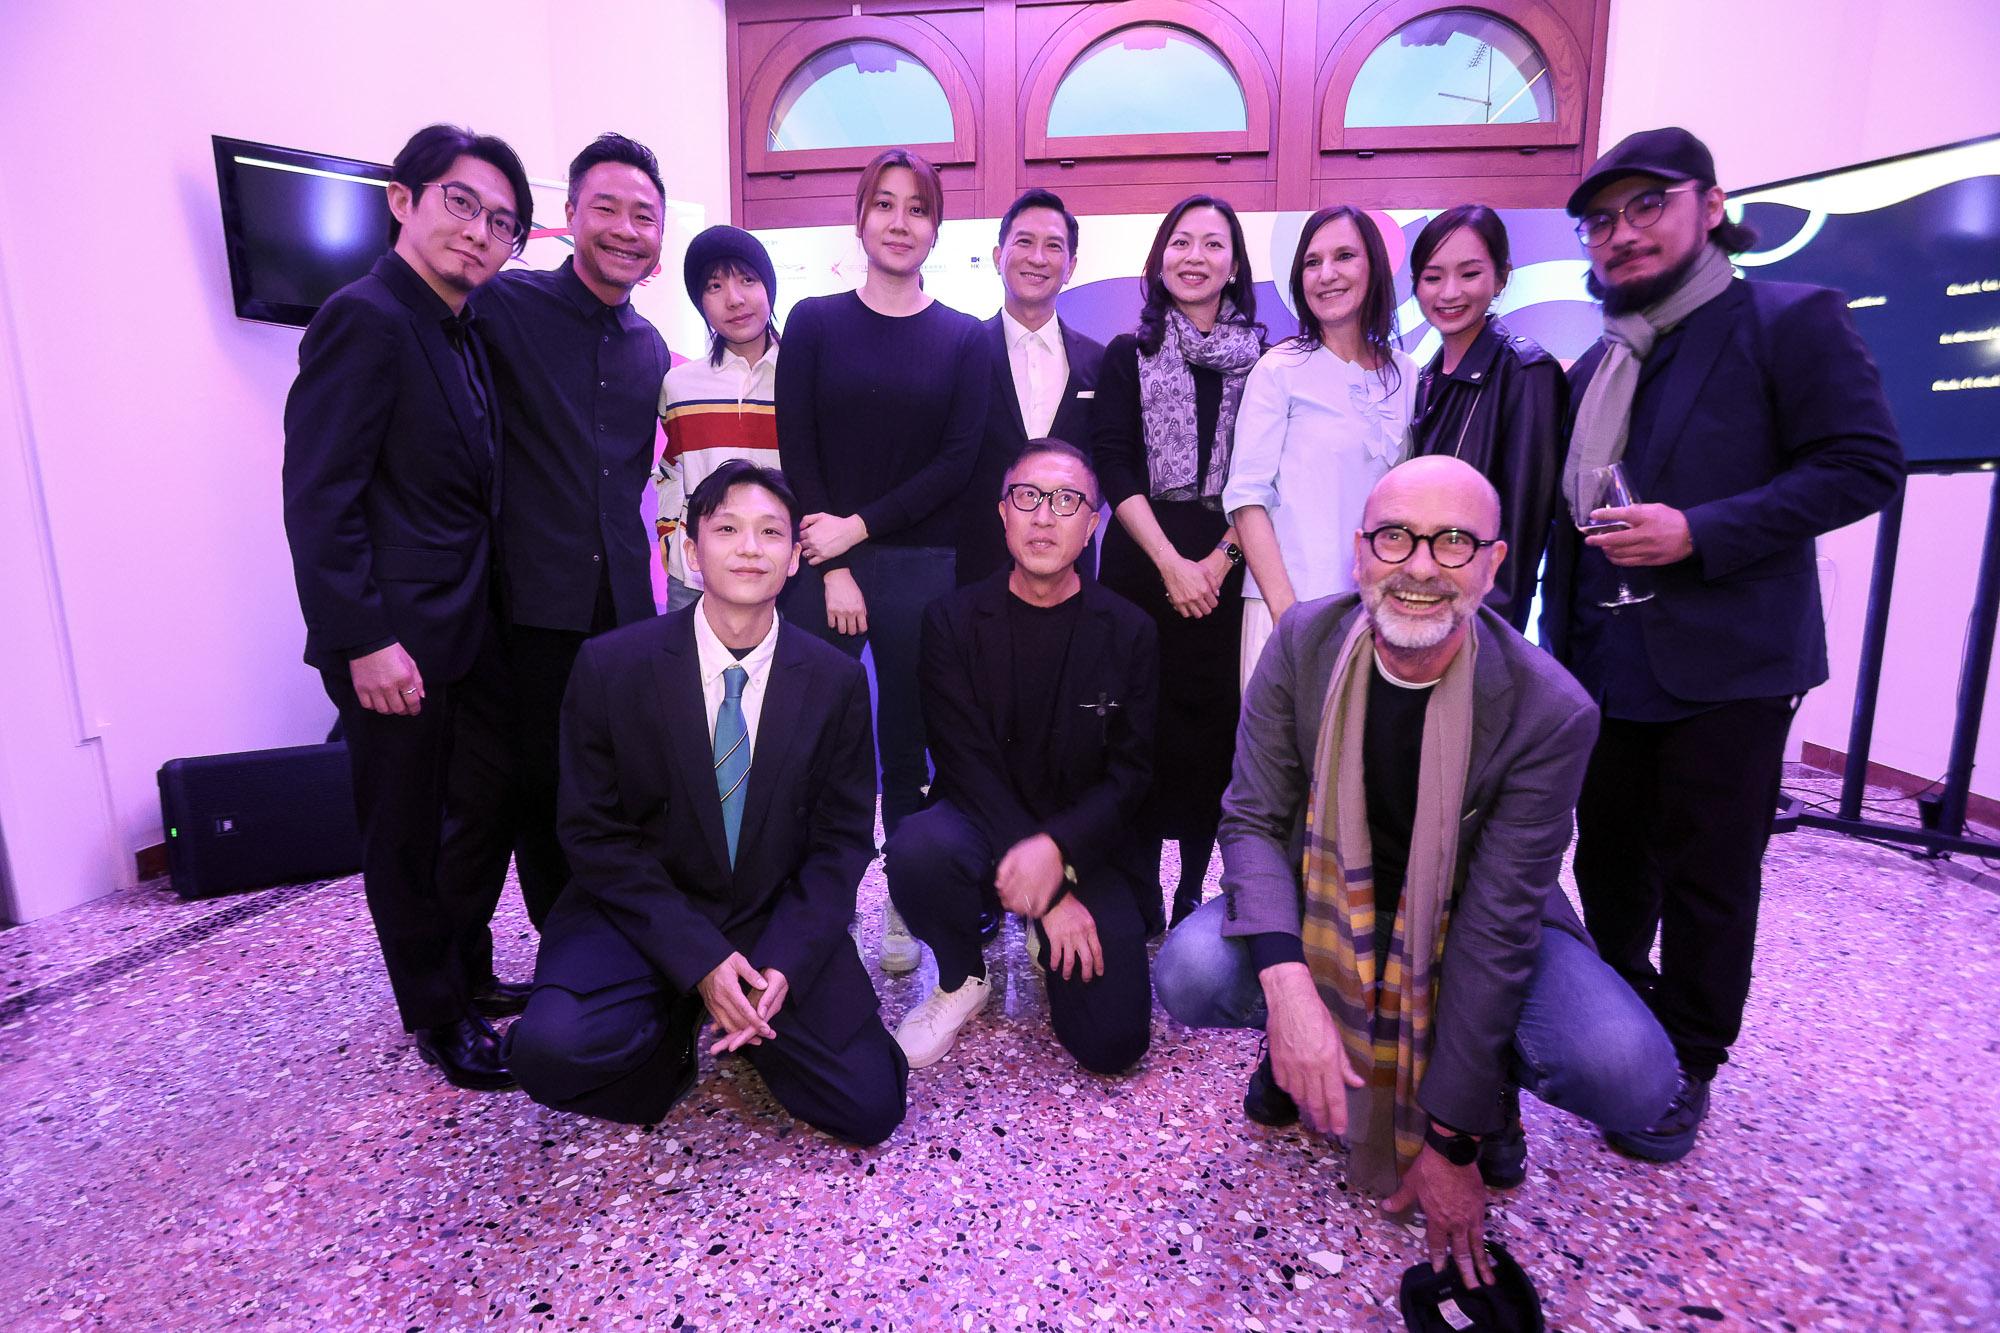 The Deputy Representative of the Hong Kong Economic and Trade Office in Brussels, Miss Fiona Li (back row, fourth right), is pictured with Hong Kong filmmakers and the directors at the Hong Kong Film Night of the Far East Film Festival held in Udine, Italy on April 27 (Udine time).